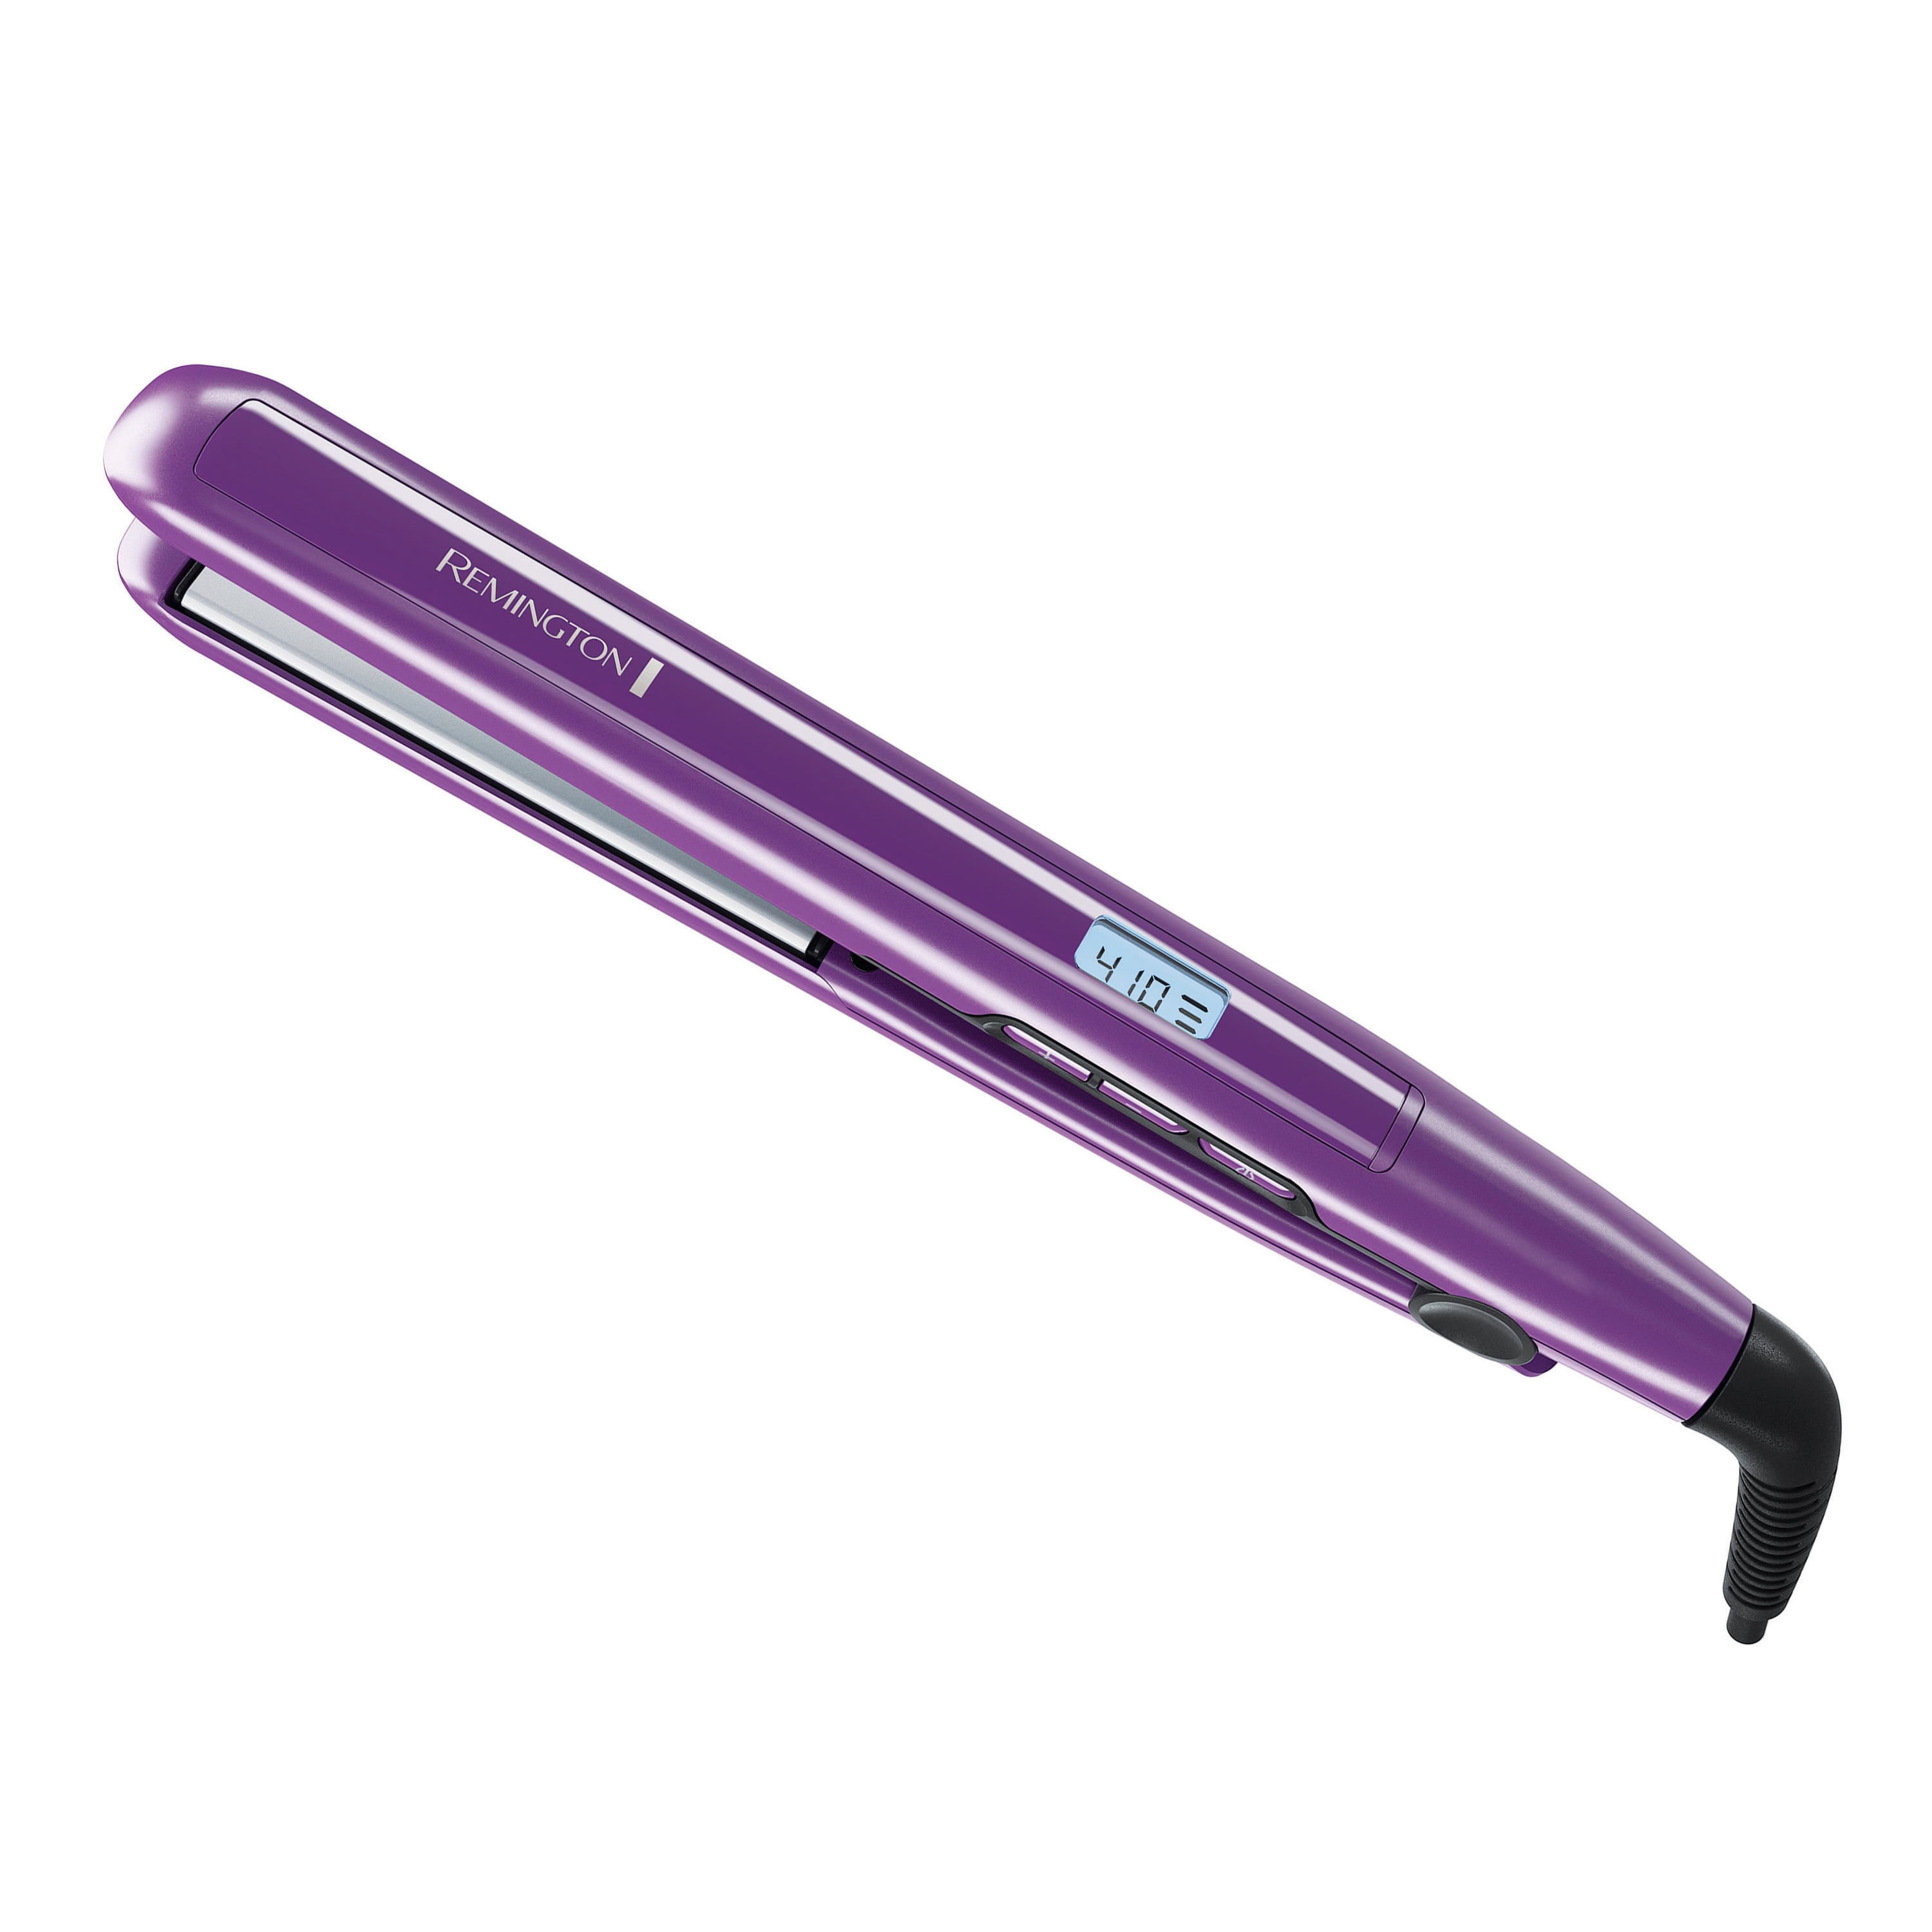 Remington S5500 1" Anti-Static Flat Iron with Floating Ceramic Plates and Digital Controls, Hair Straightener, Purple